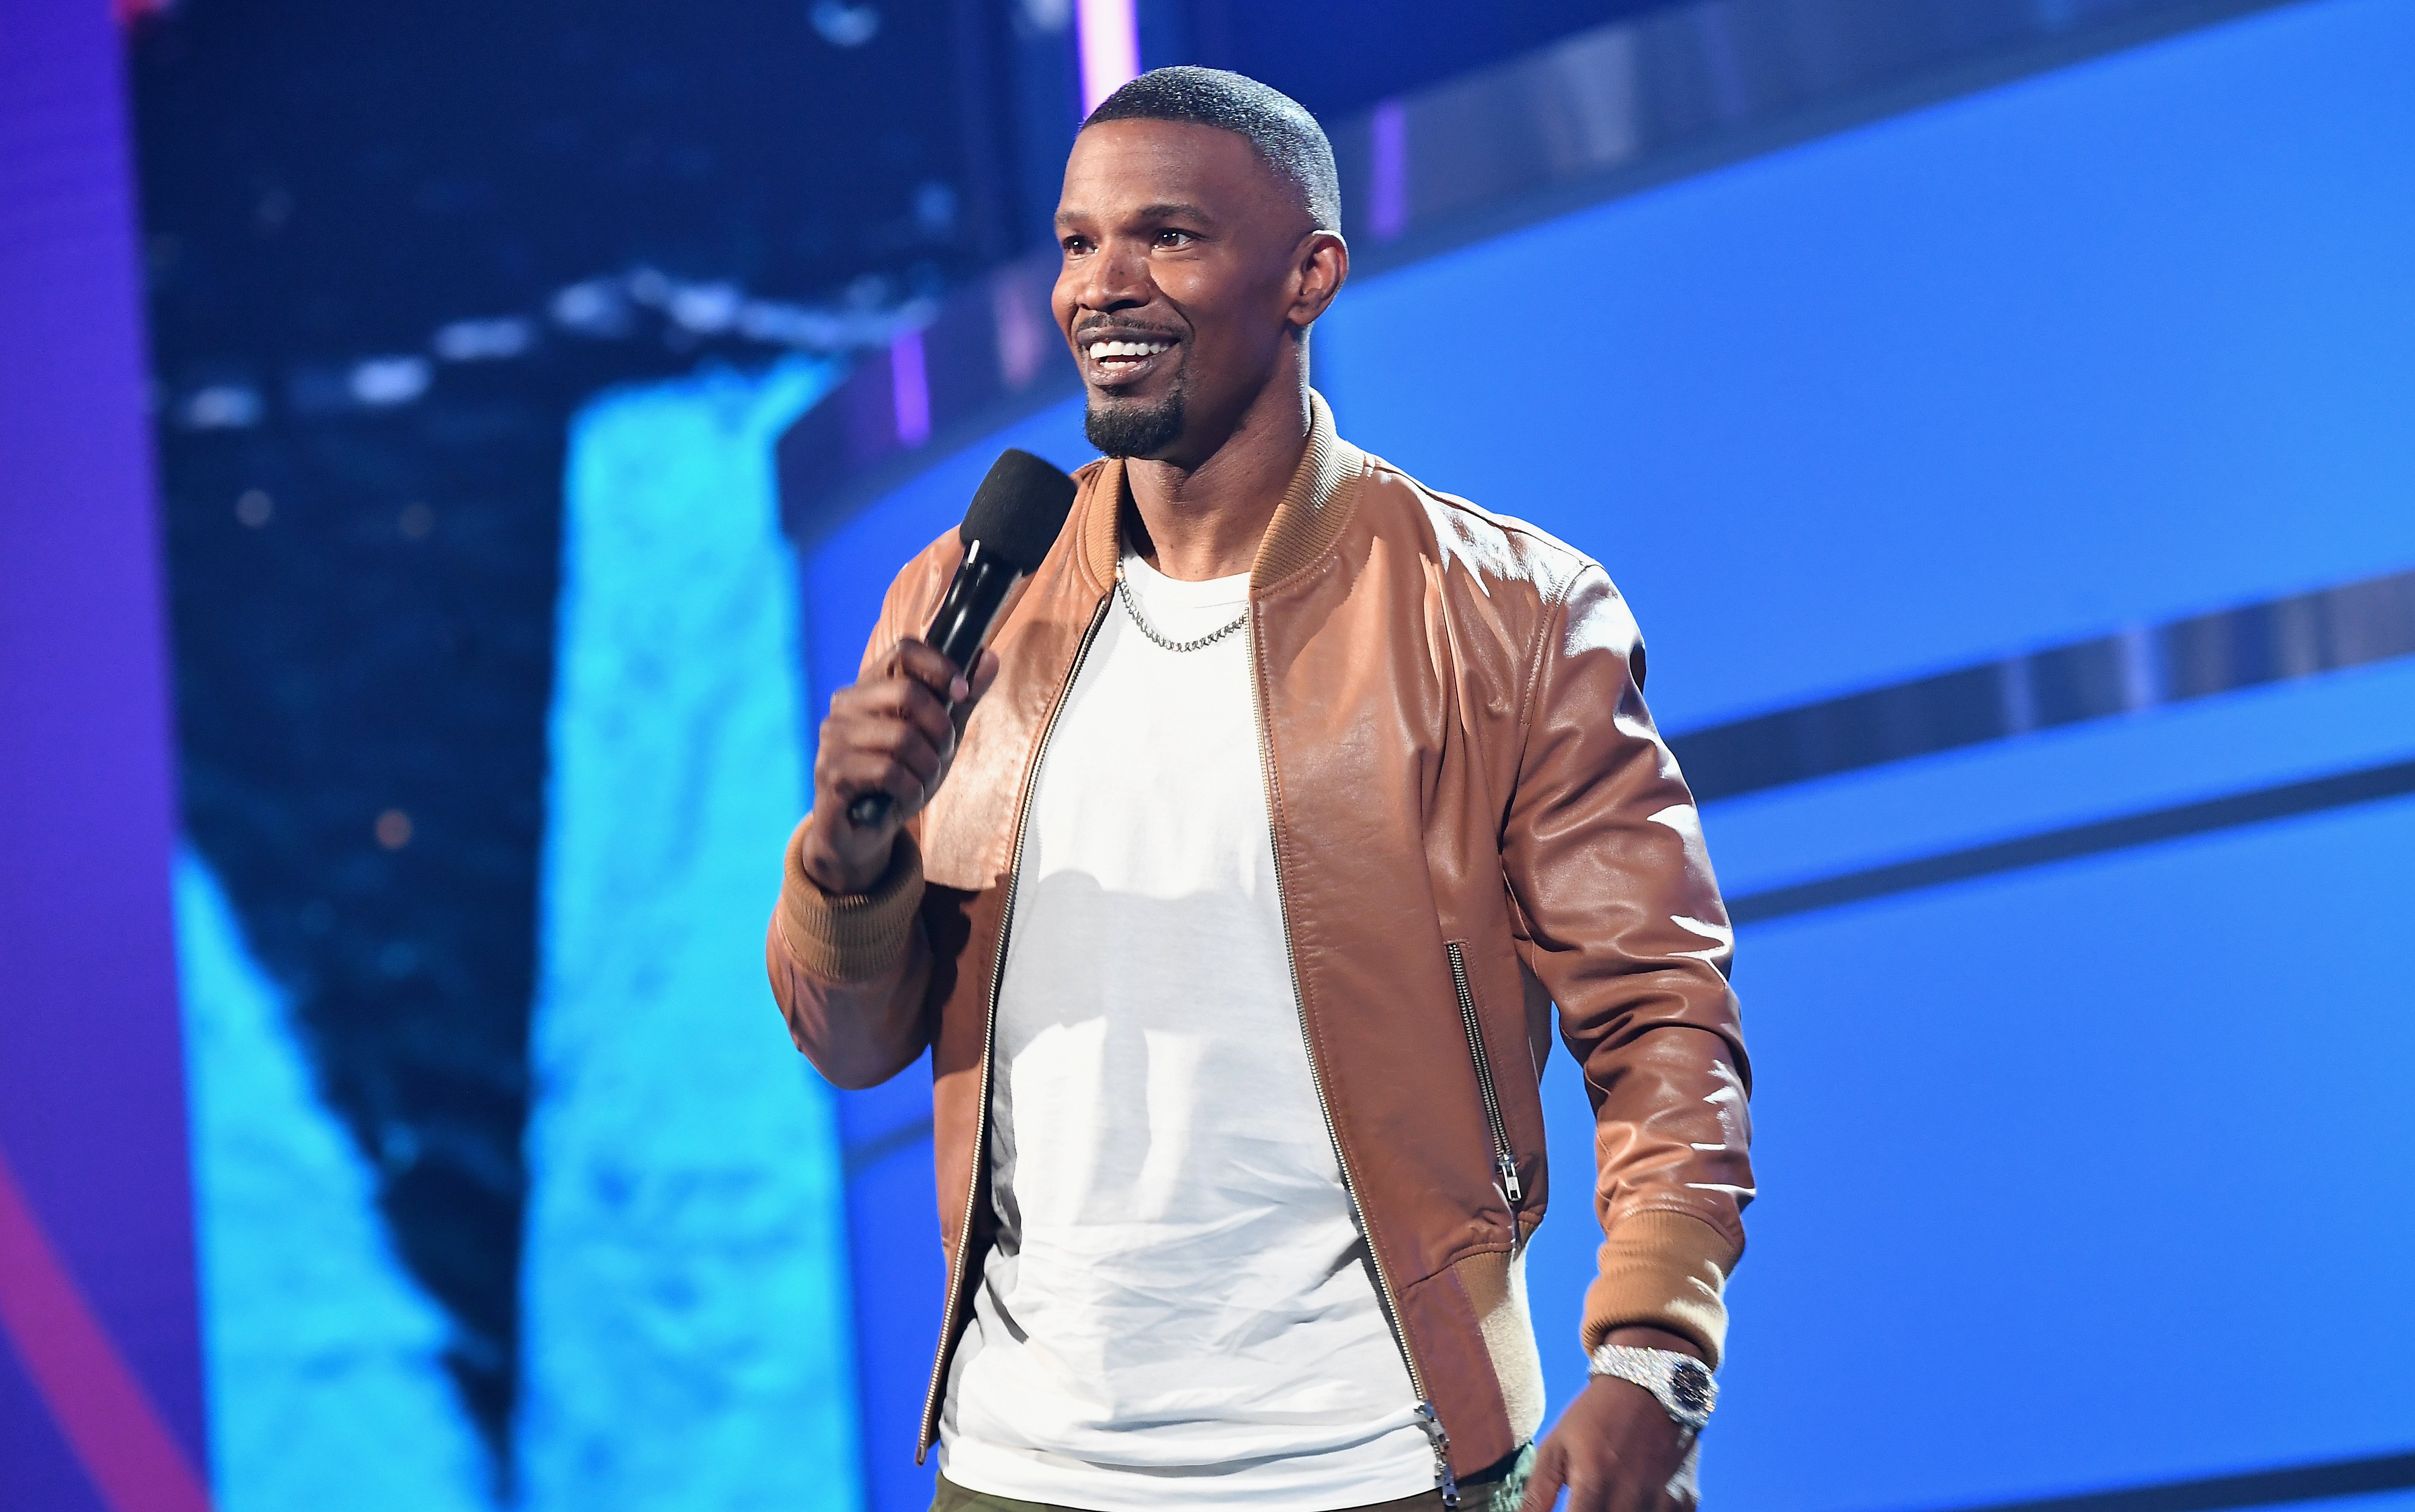  Jamie Foxx speaks onstage at the 2018 BET Awards at Microsoft Theater on June 24, 2018 in Los Angeles, California | Photo: GettyImages